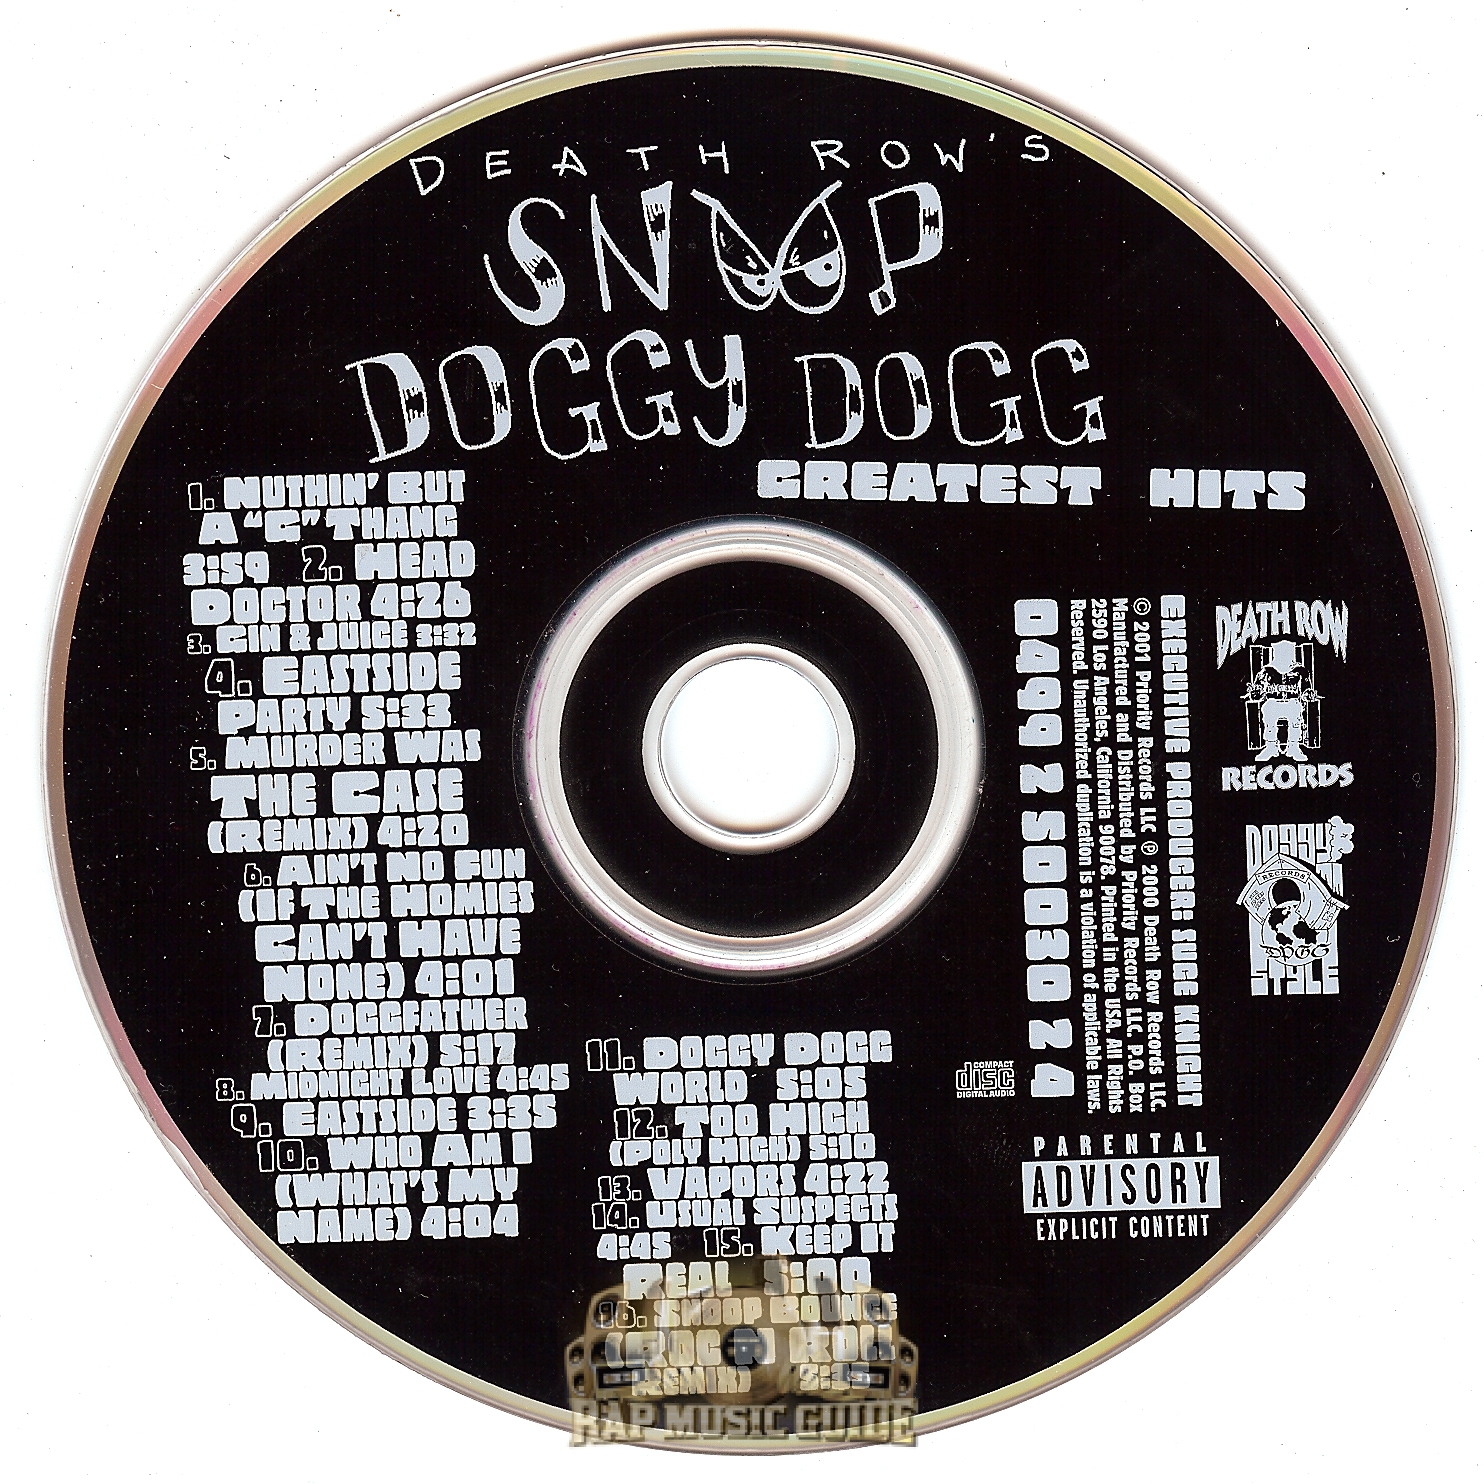 Snoop Doggy Dogg - Greatest Hits: CD | Rap Music Guide